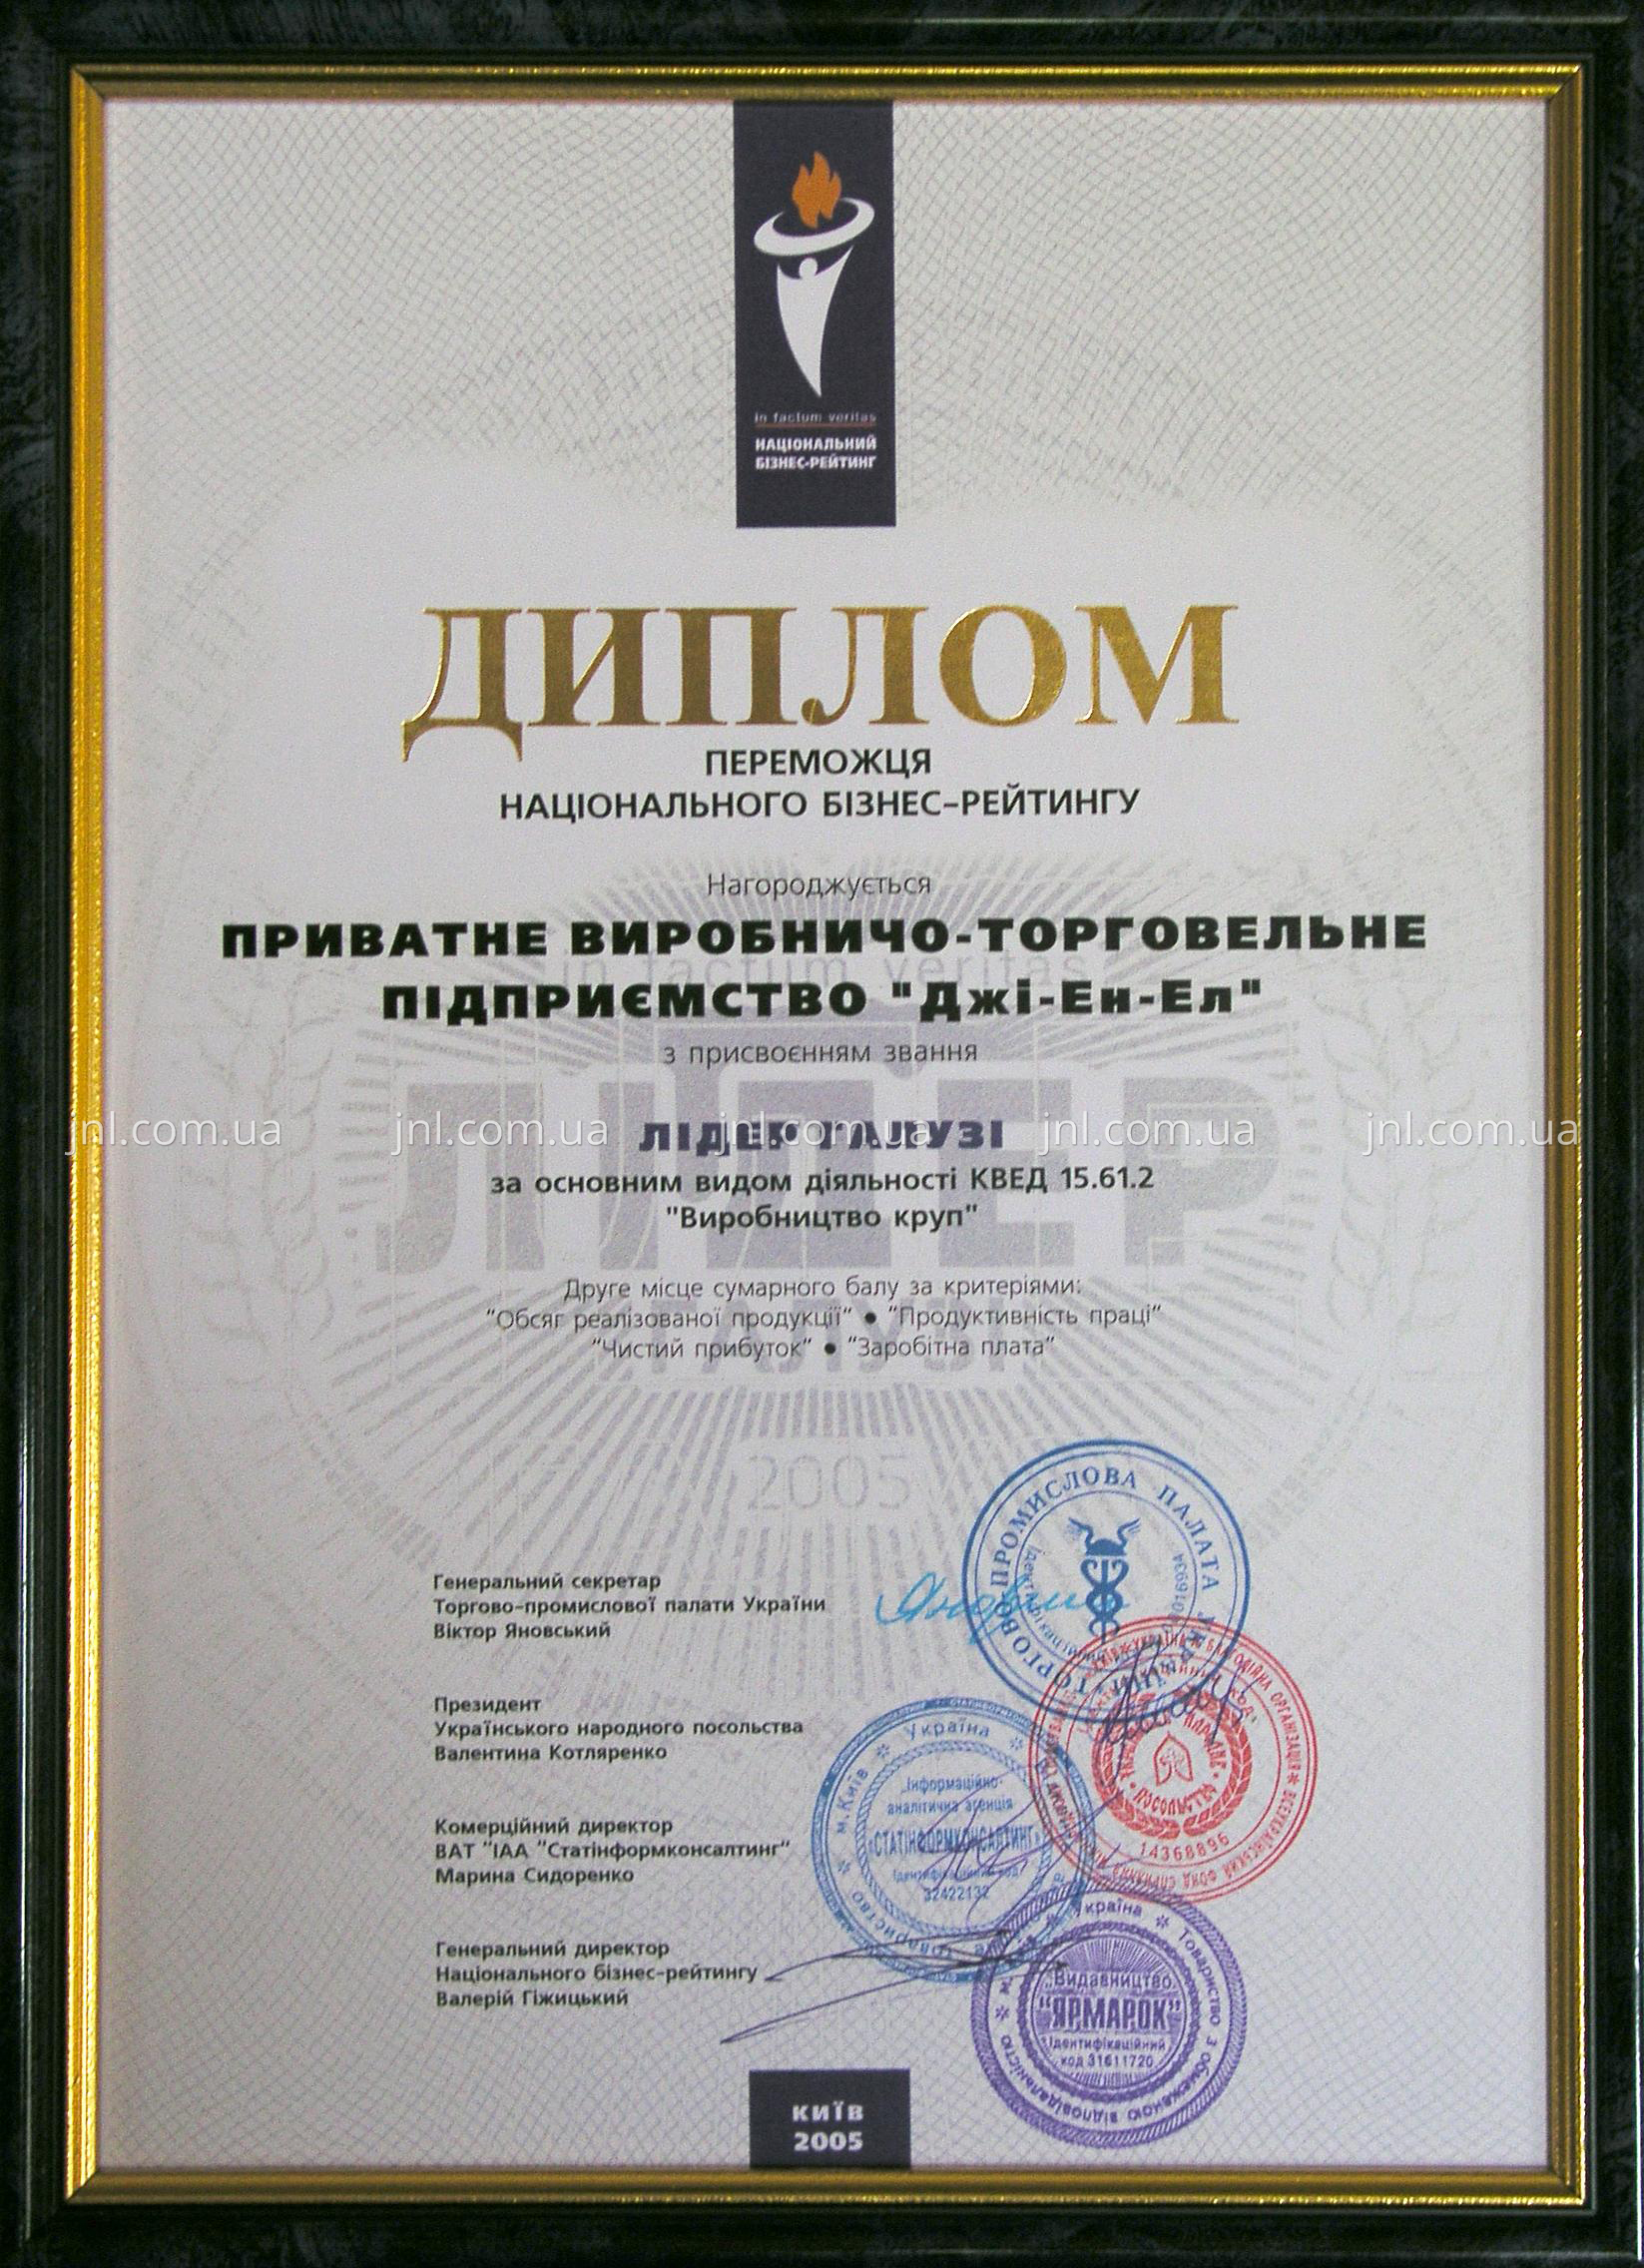 The winner of National Business Rating “The leader of the branch of industry-2005” 